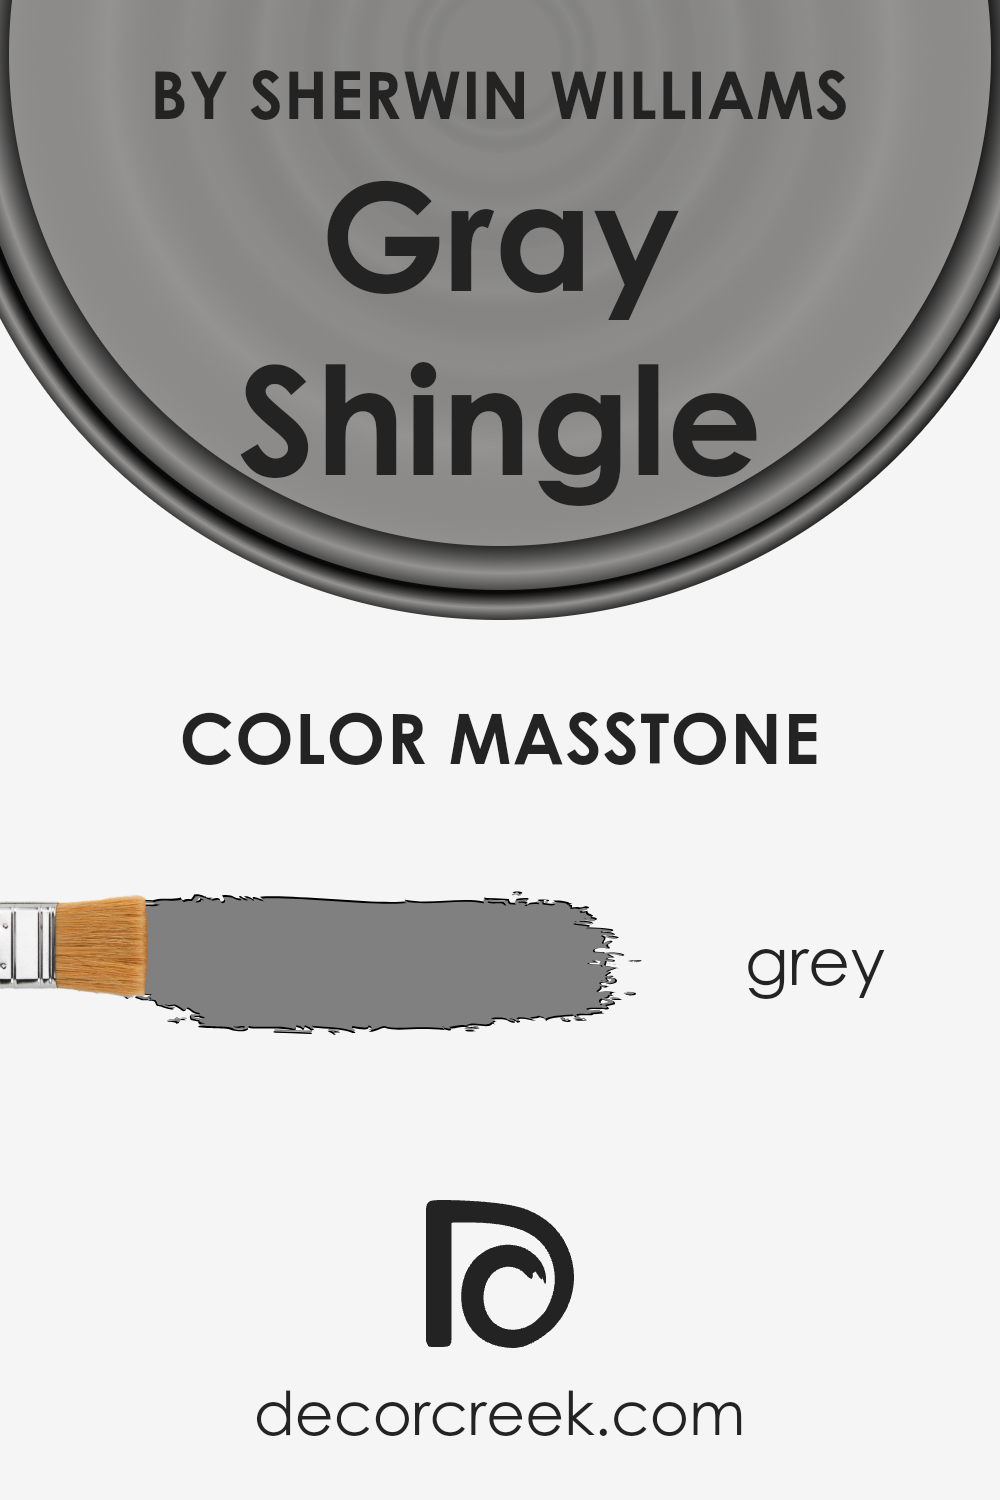 what_is_the_masstone_of_gray_shingle_sw_7670